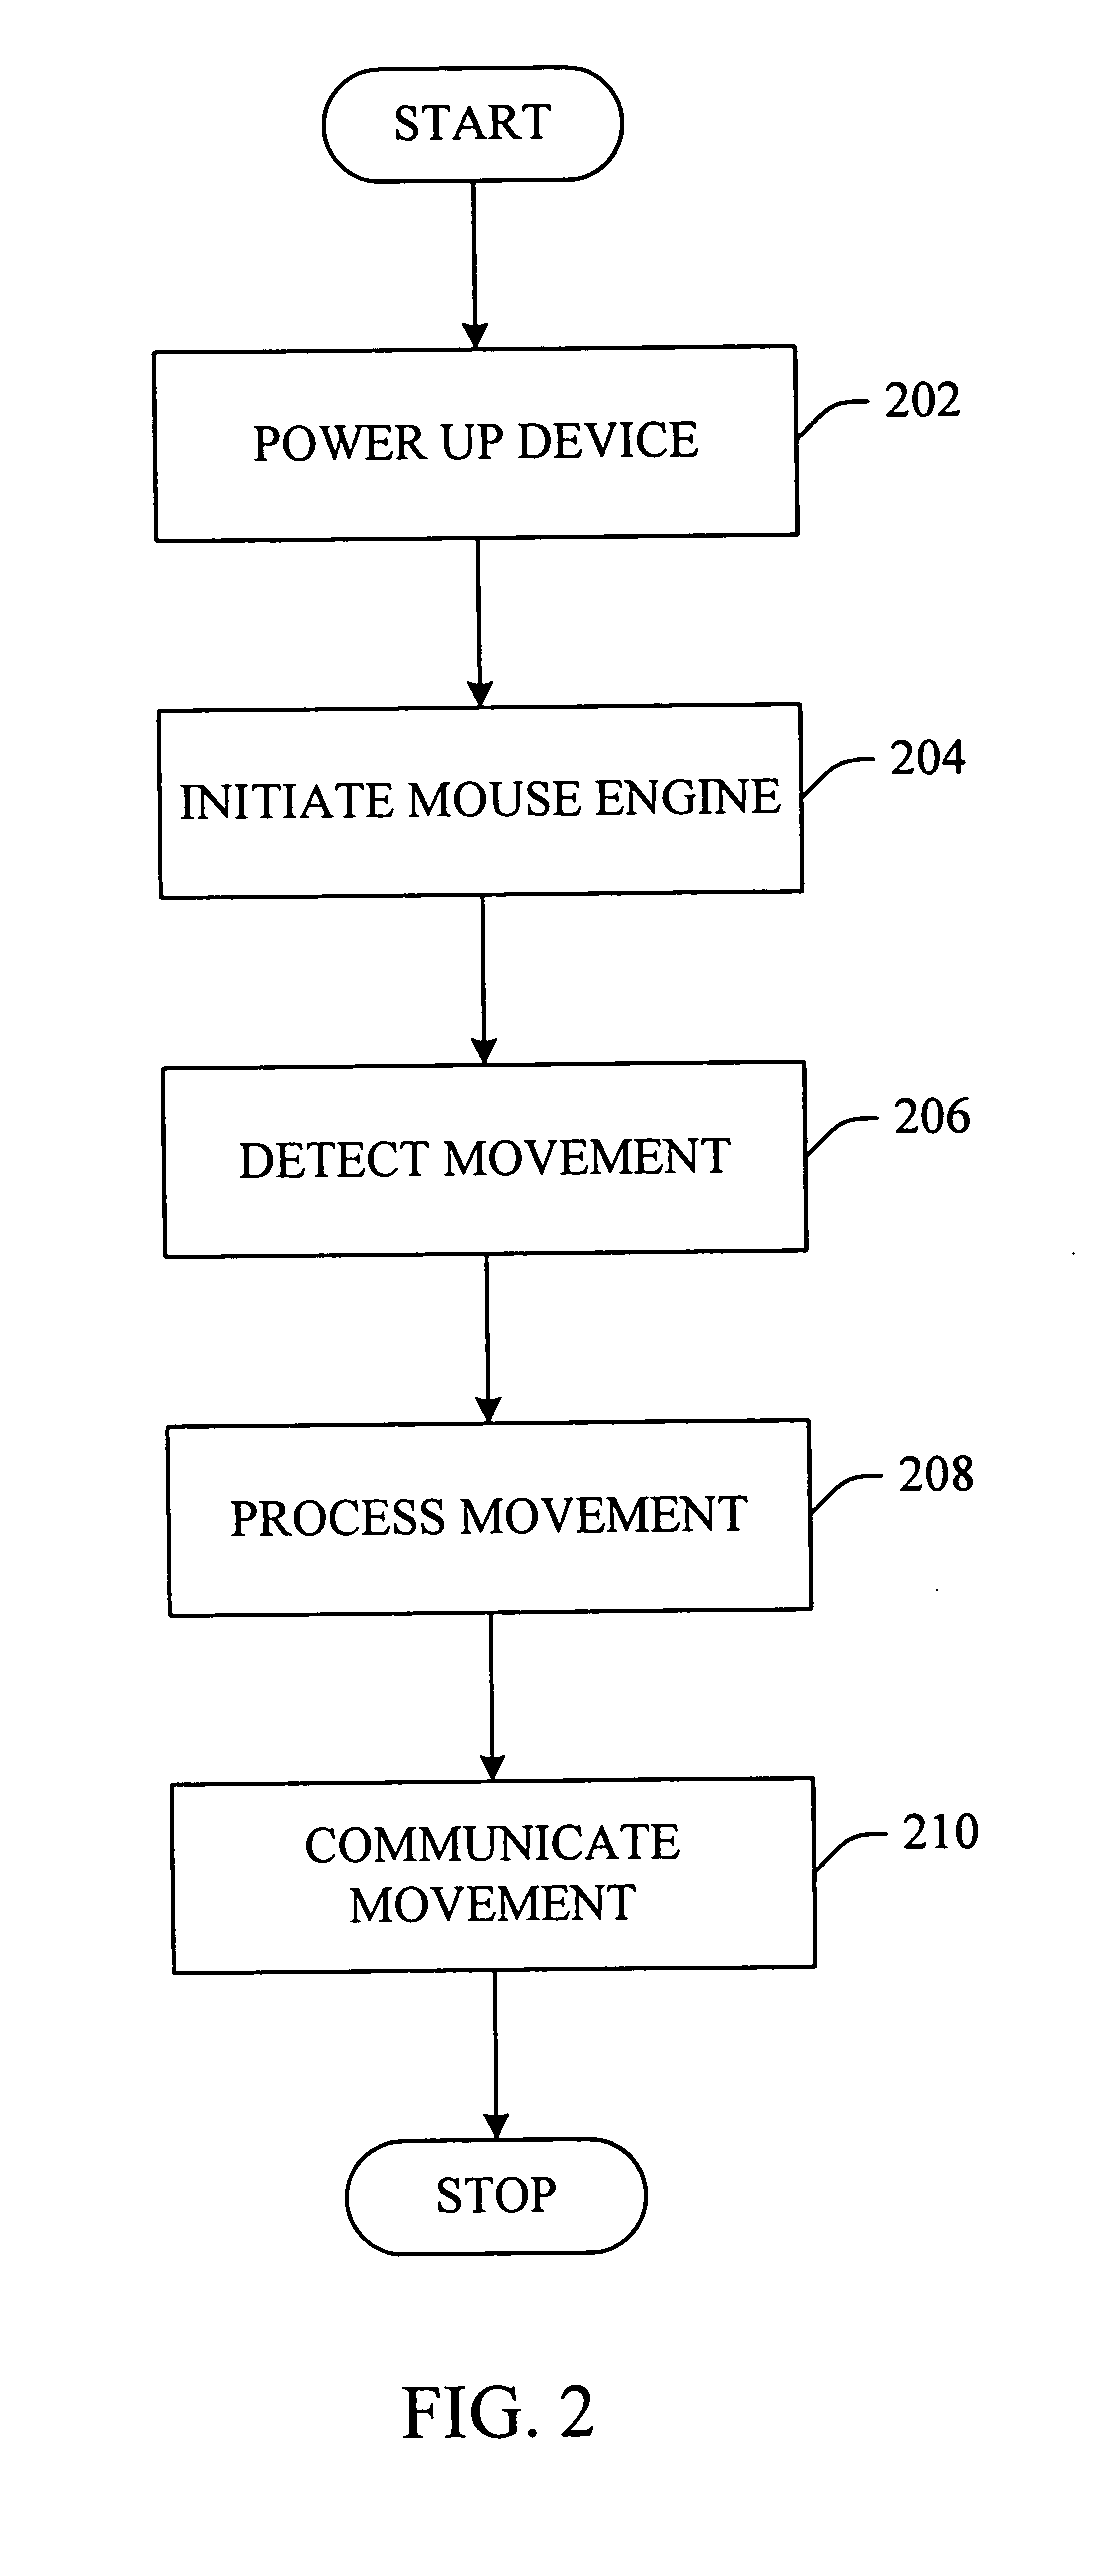 Integration of navigation device functionality into handheld devices